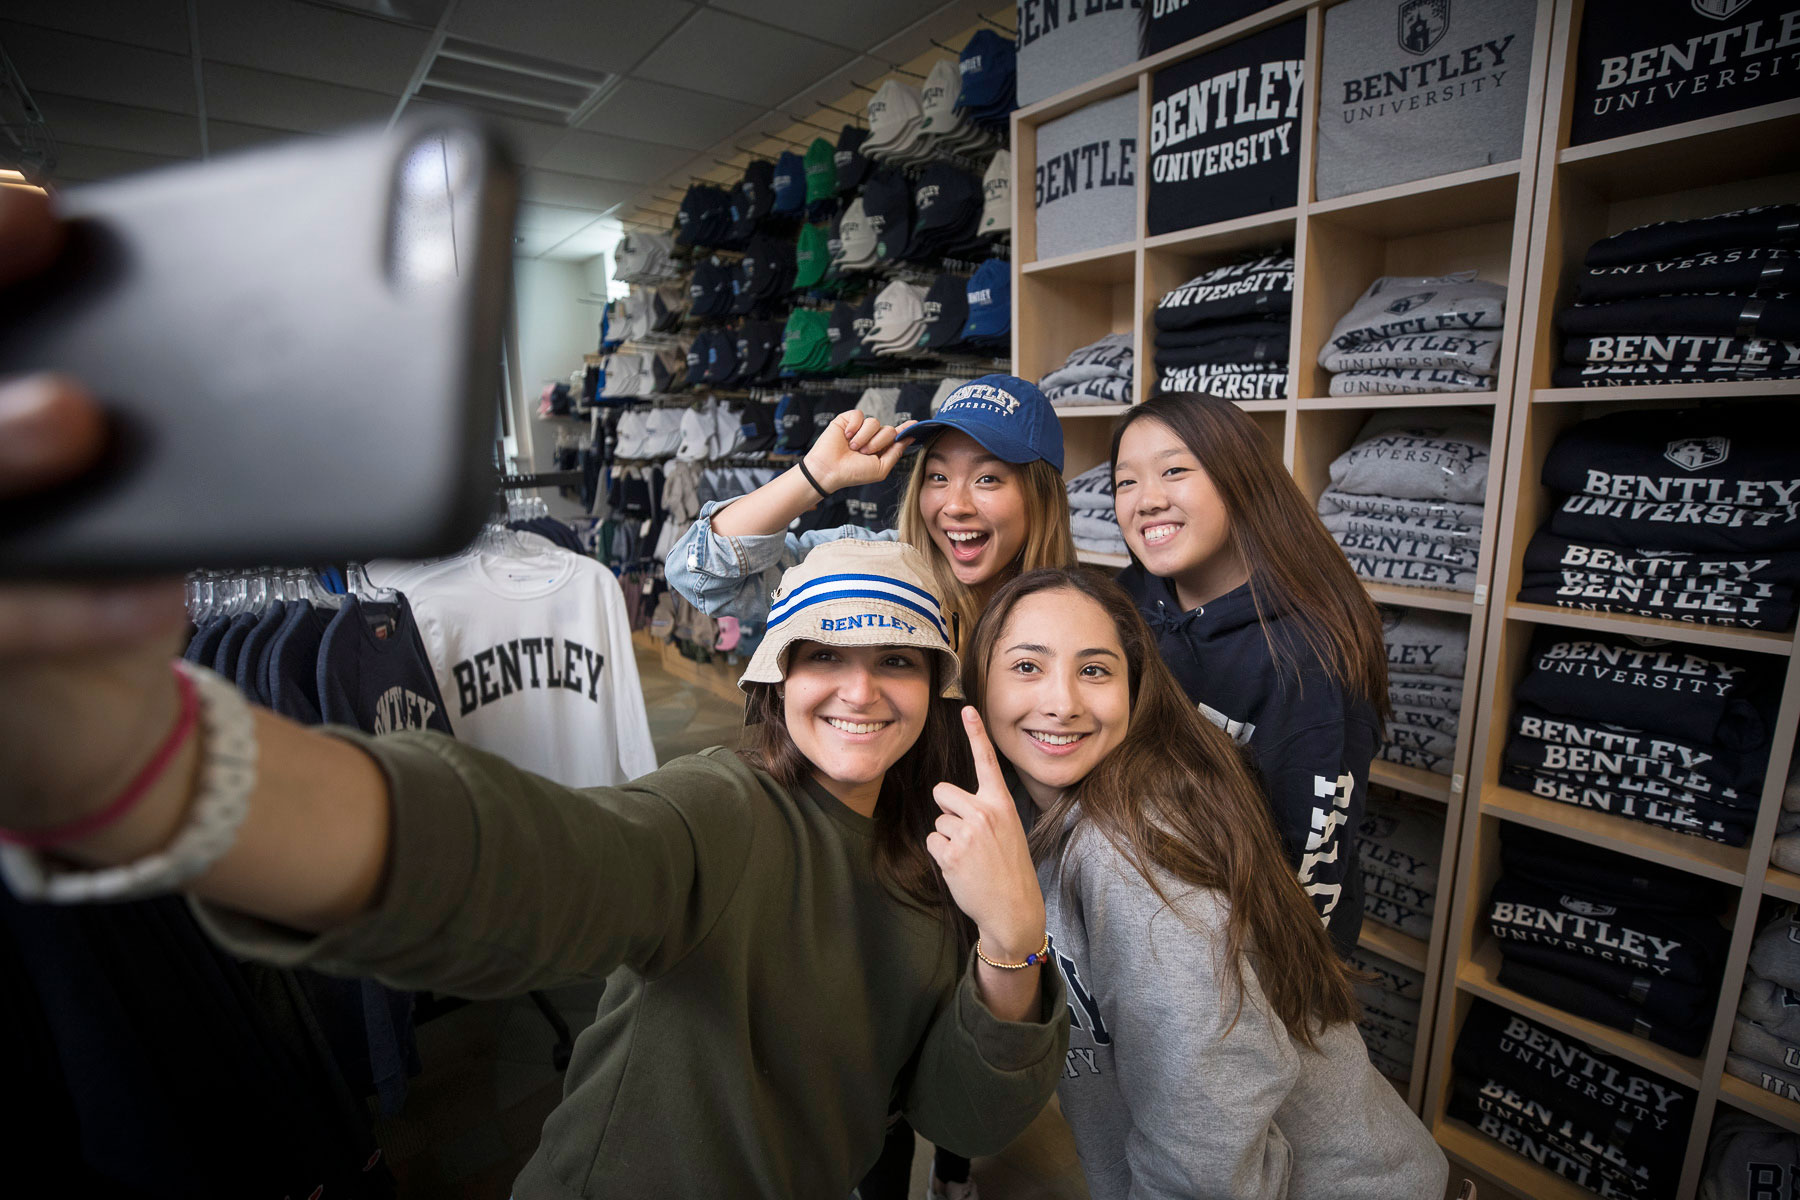 A group of girls take a selfie while wearing Bentley University merchandise